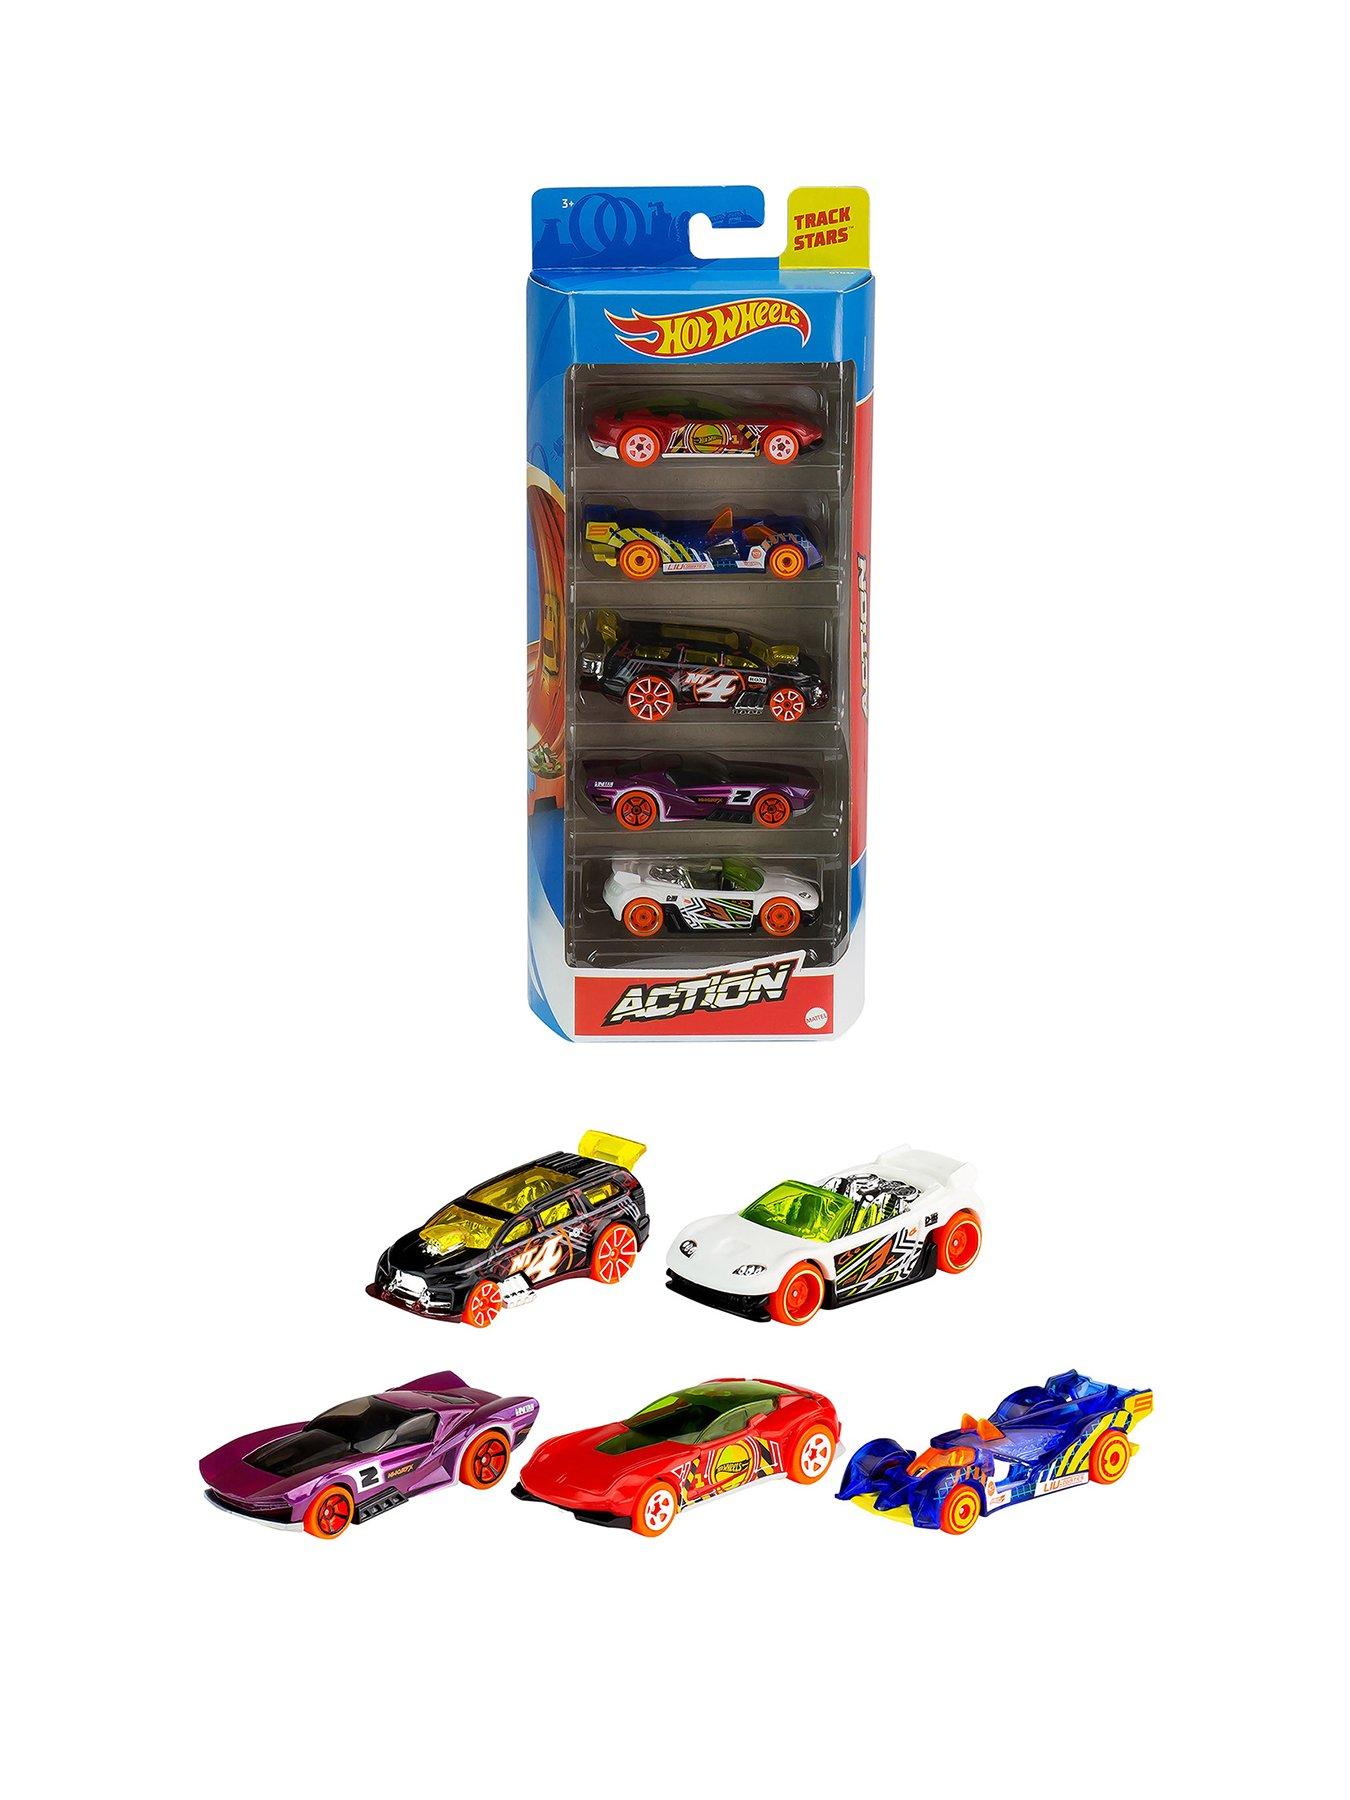 Hot Wheels Double Loop Dash Track Set with 2 Toy Cars in 1:64 Scale, 12-ft  Long, for Children Ages 5 Years and Up